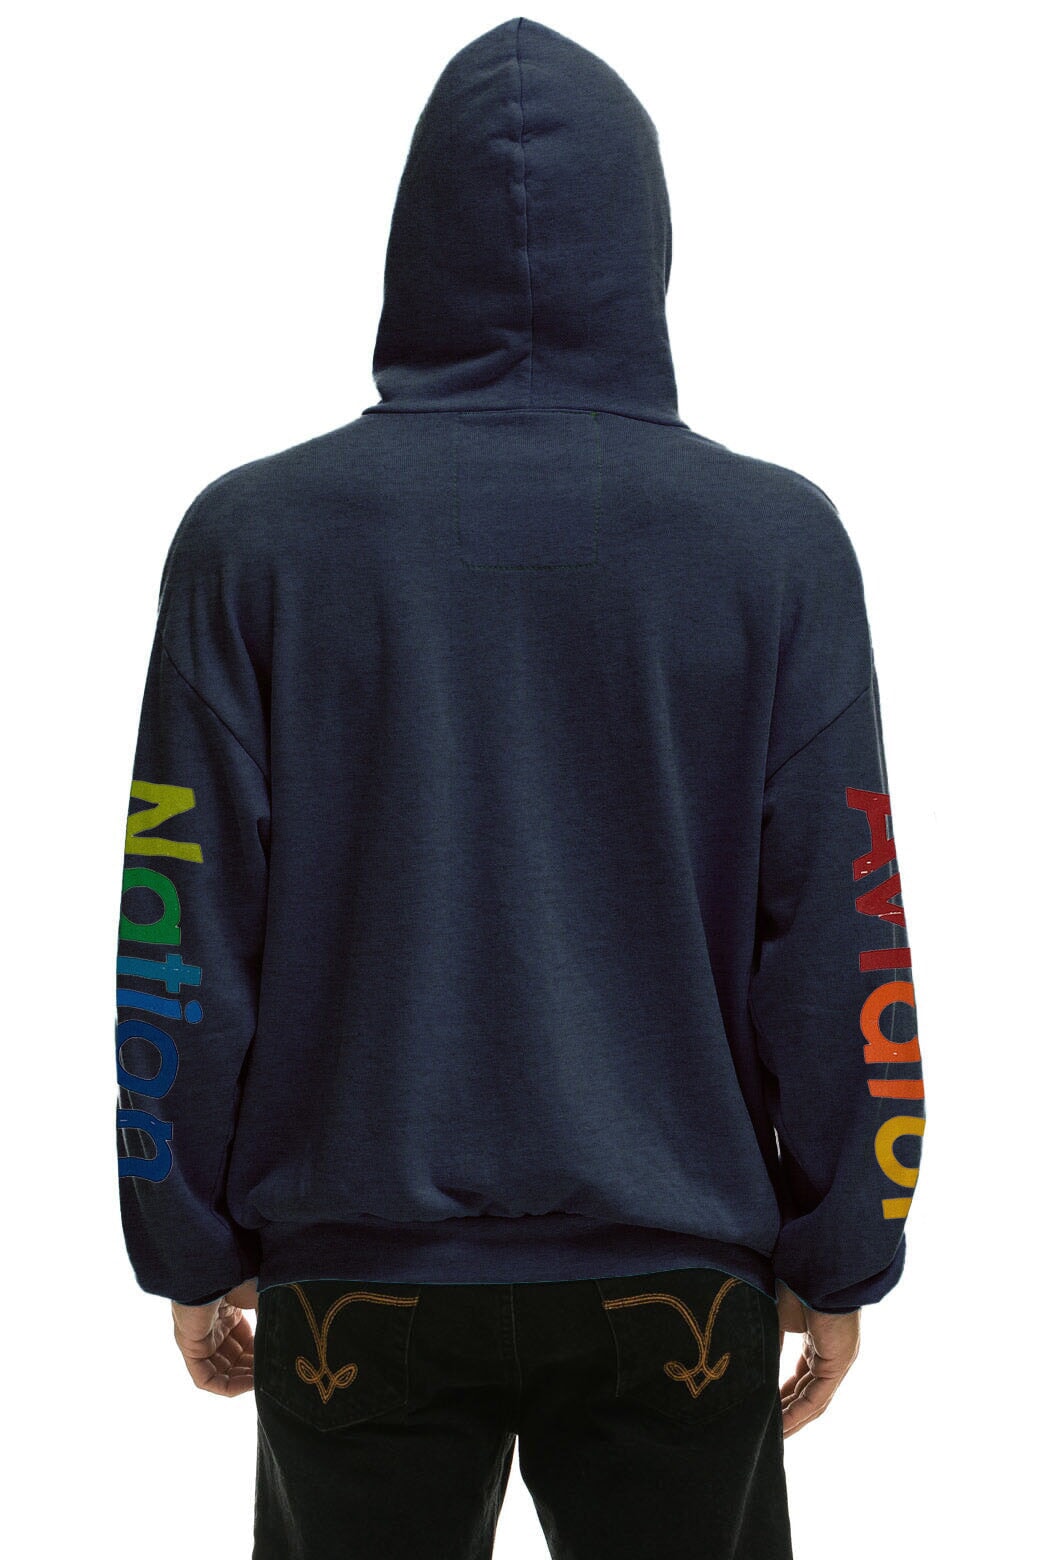 AVIATOR NATION MIAMI RELAXED PULLOVER HOODIE - NAVY Hoodie Aviator Nation 